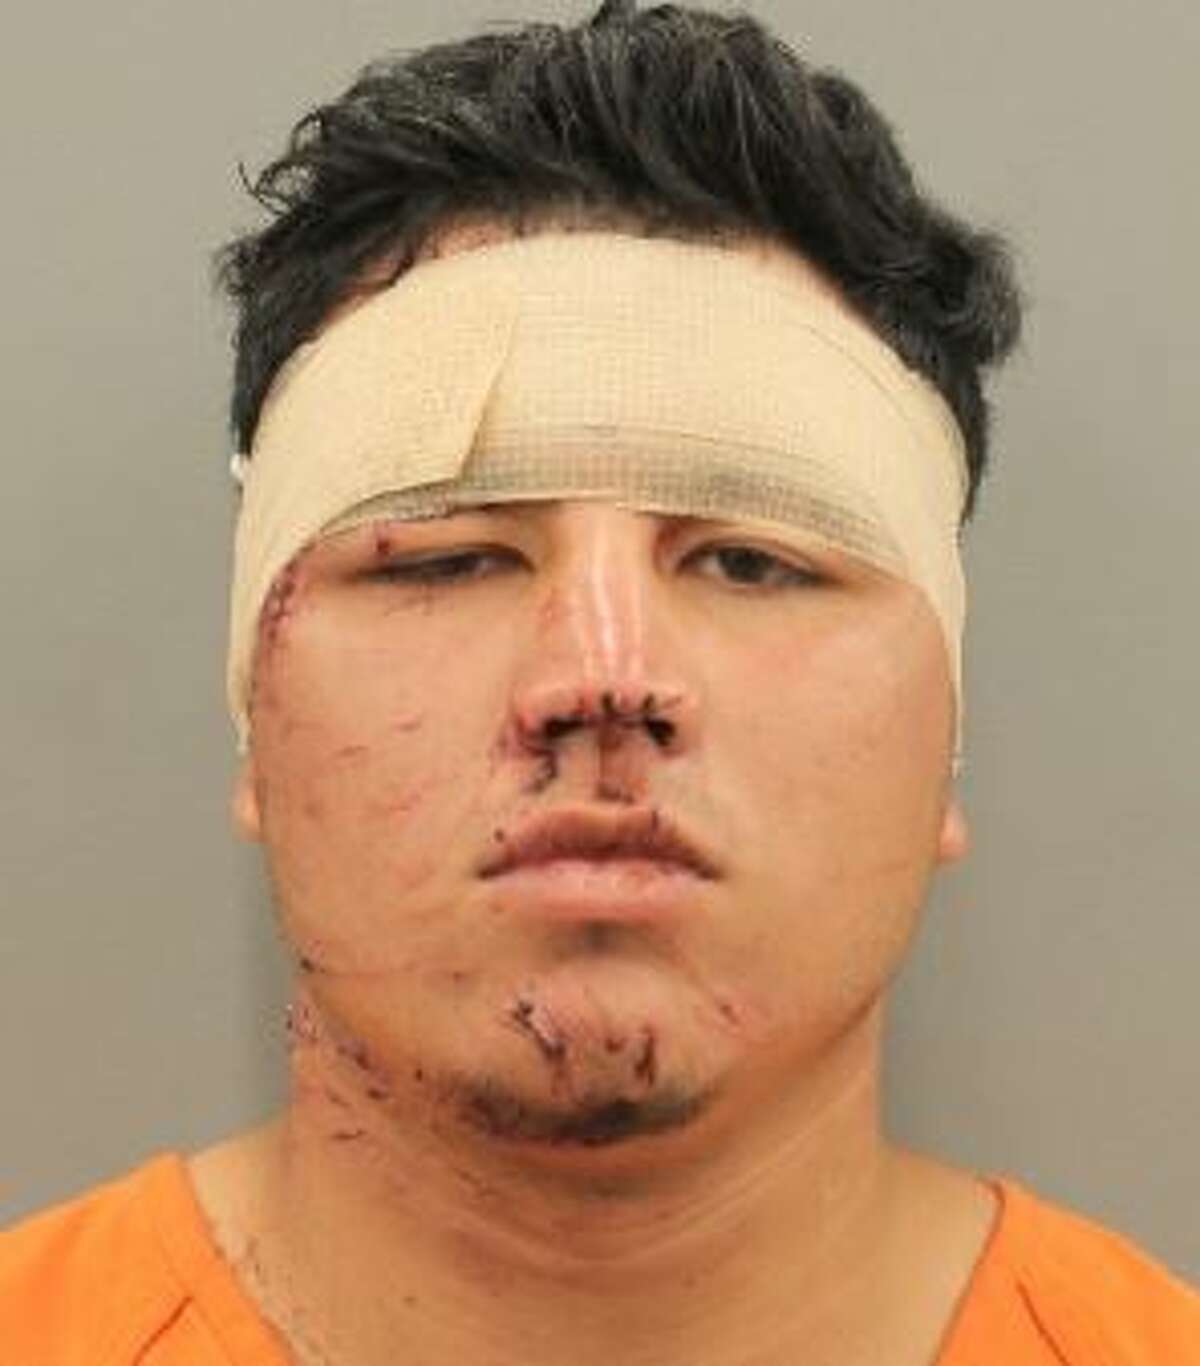 Gustavo Perez Alvarez, 19, was charged with intoxication manslaughter and failure to stop and render aid after a crash on Sunday, Sept. 29 in Houston's Sharpstown area. According to court documents, Perez Alvarez had a blood alcohol level of .248 when he was arrested, more than three times the legal limit of intoxication for adults in Texas, which is .08. 6.2.6